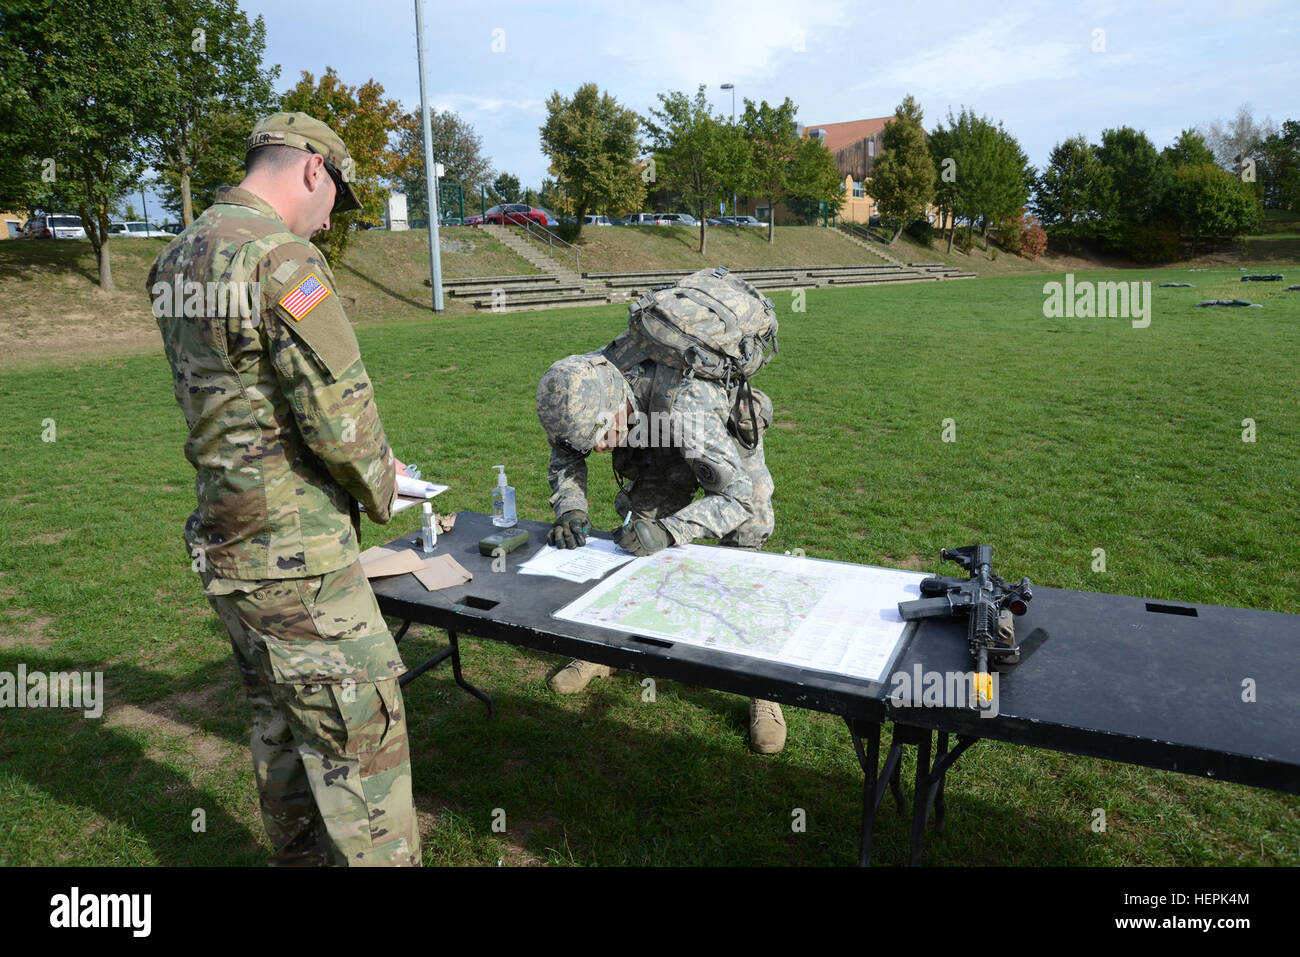 U.S. troopers with 2nd Cavalry Regiment locate an unknown point on a map while training for the 2nd CR Expert Infantryman Badge (EIB) qualification at the 7th Army Joint Multinational Training Command’s Vilseck Training Area, Germany, Sept. 16, 2015. (U.S. Army photo by VI Specialist Matthias Fruth/Released) 2nd Cavalry Regiment Expert Infantryman Badge 2015 150916-A-FS311-003 Stock Photo